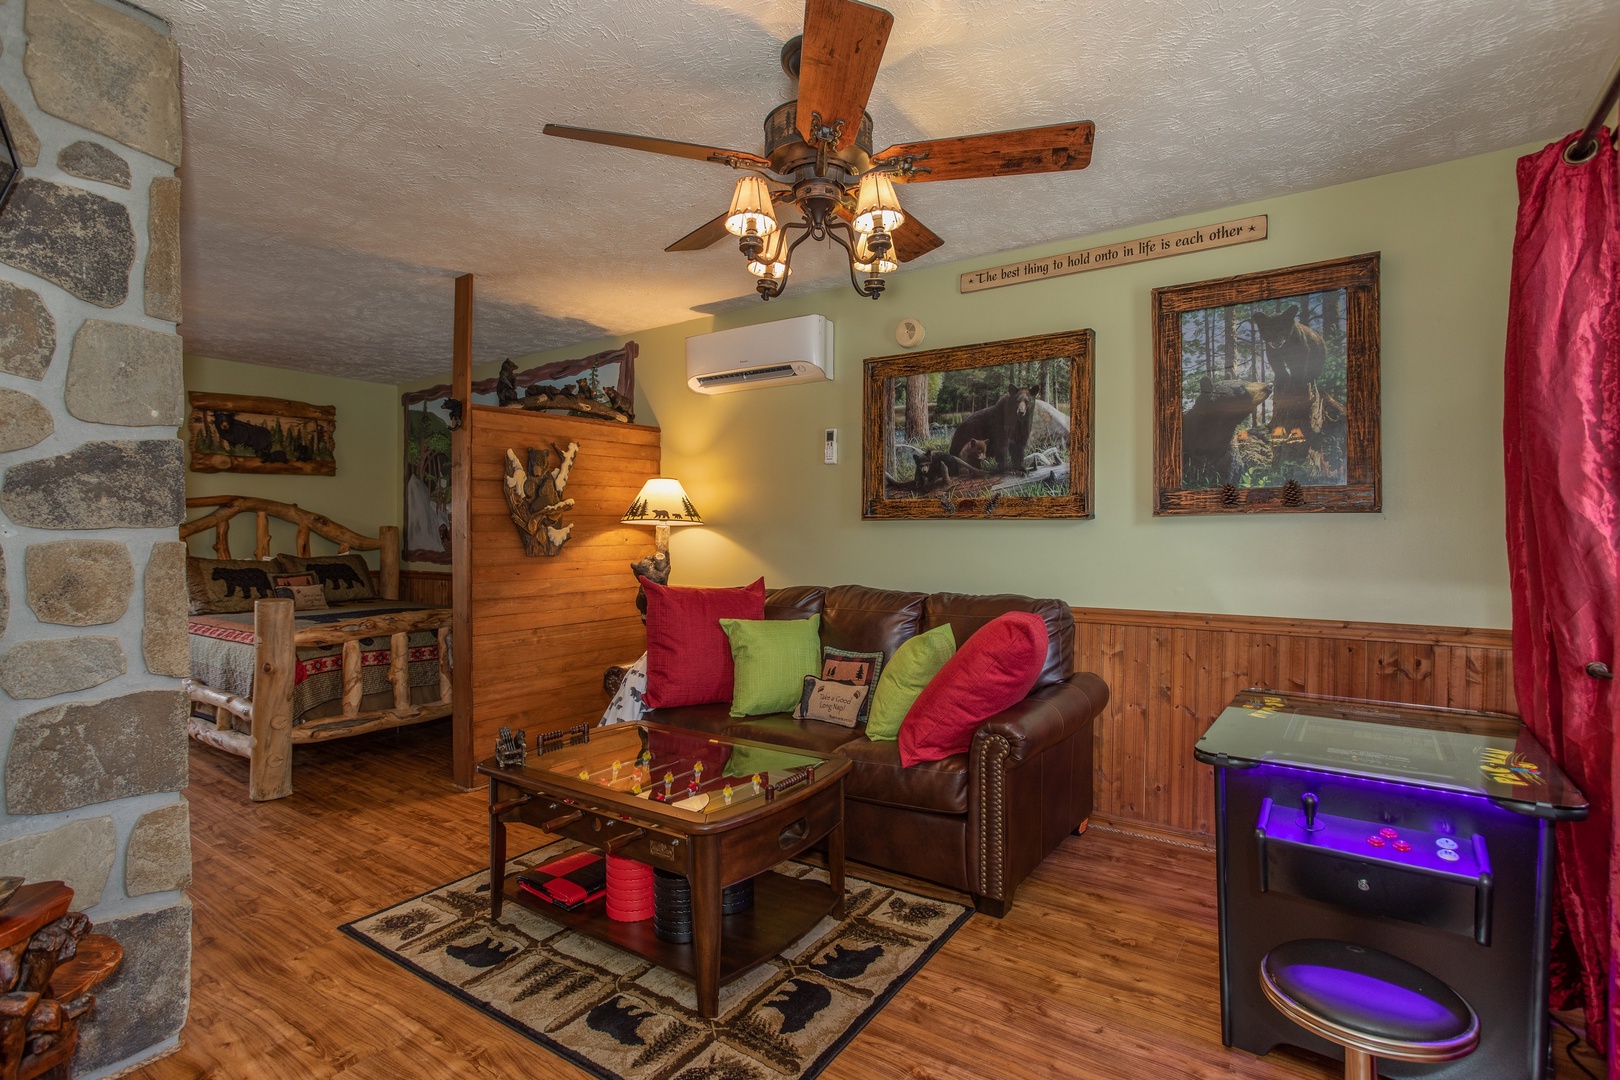 Sleeper sofa and arcade game in the living room at Bear Mountain Hollow, a 1 bedroom cabin rental located in Pigeon Forge